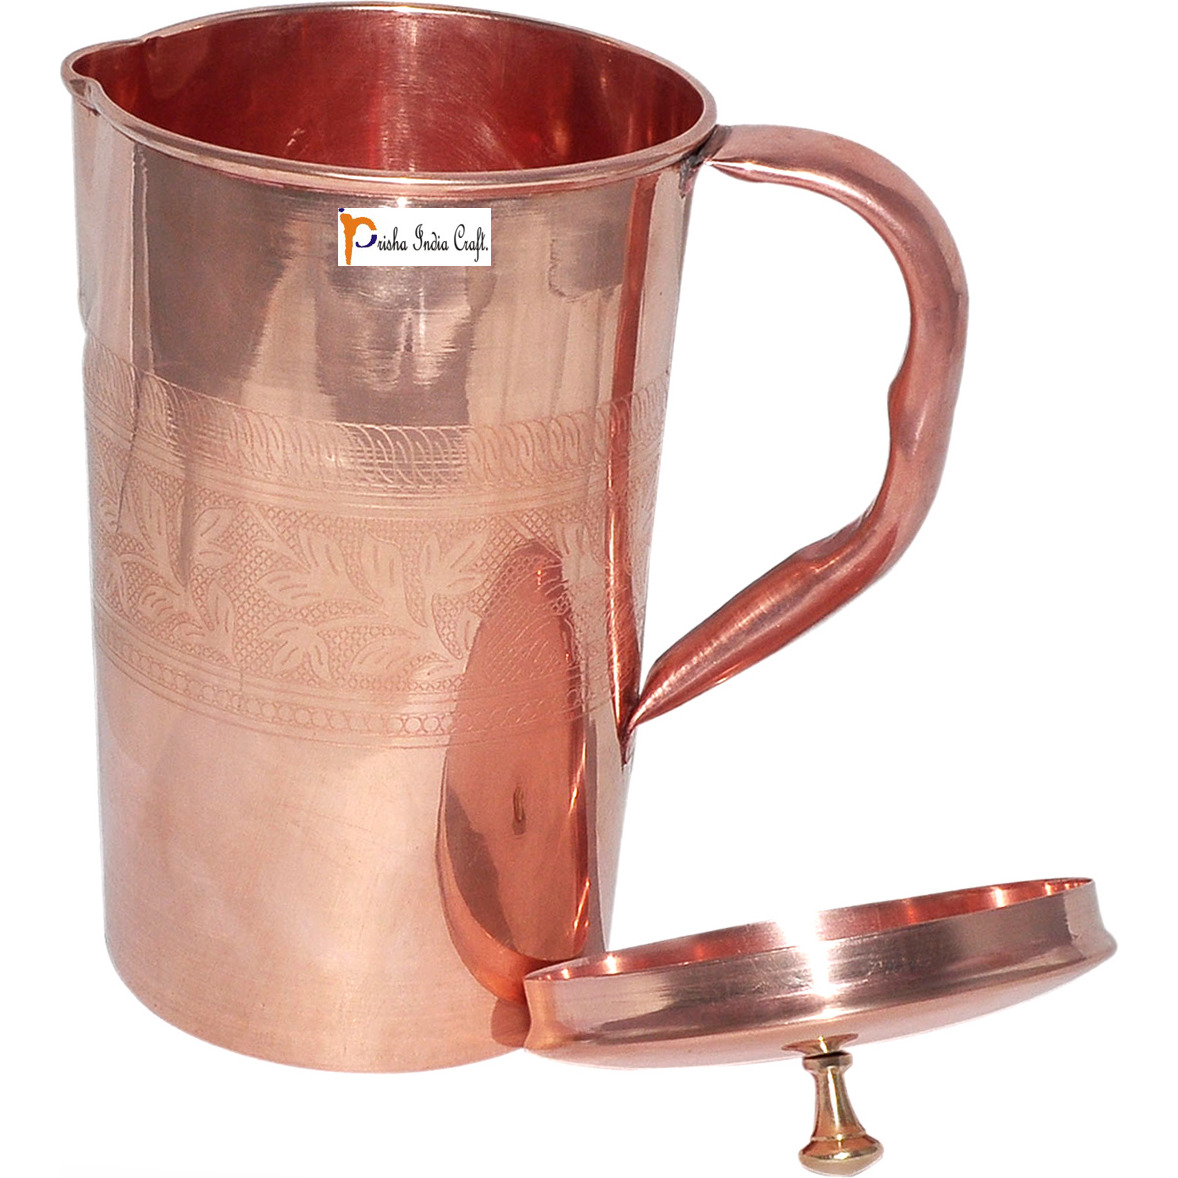 Prisha India Craft B. Dinnerware Traditional Stainless Steel Copper Dinner Set of Thali Plate, Bowls, Glass and Spoons, Dia 13  With 1 Pure Copper Embossed Pitcher Jug - Christmas Gift